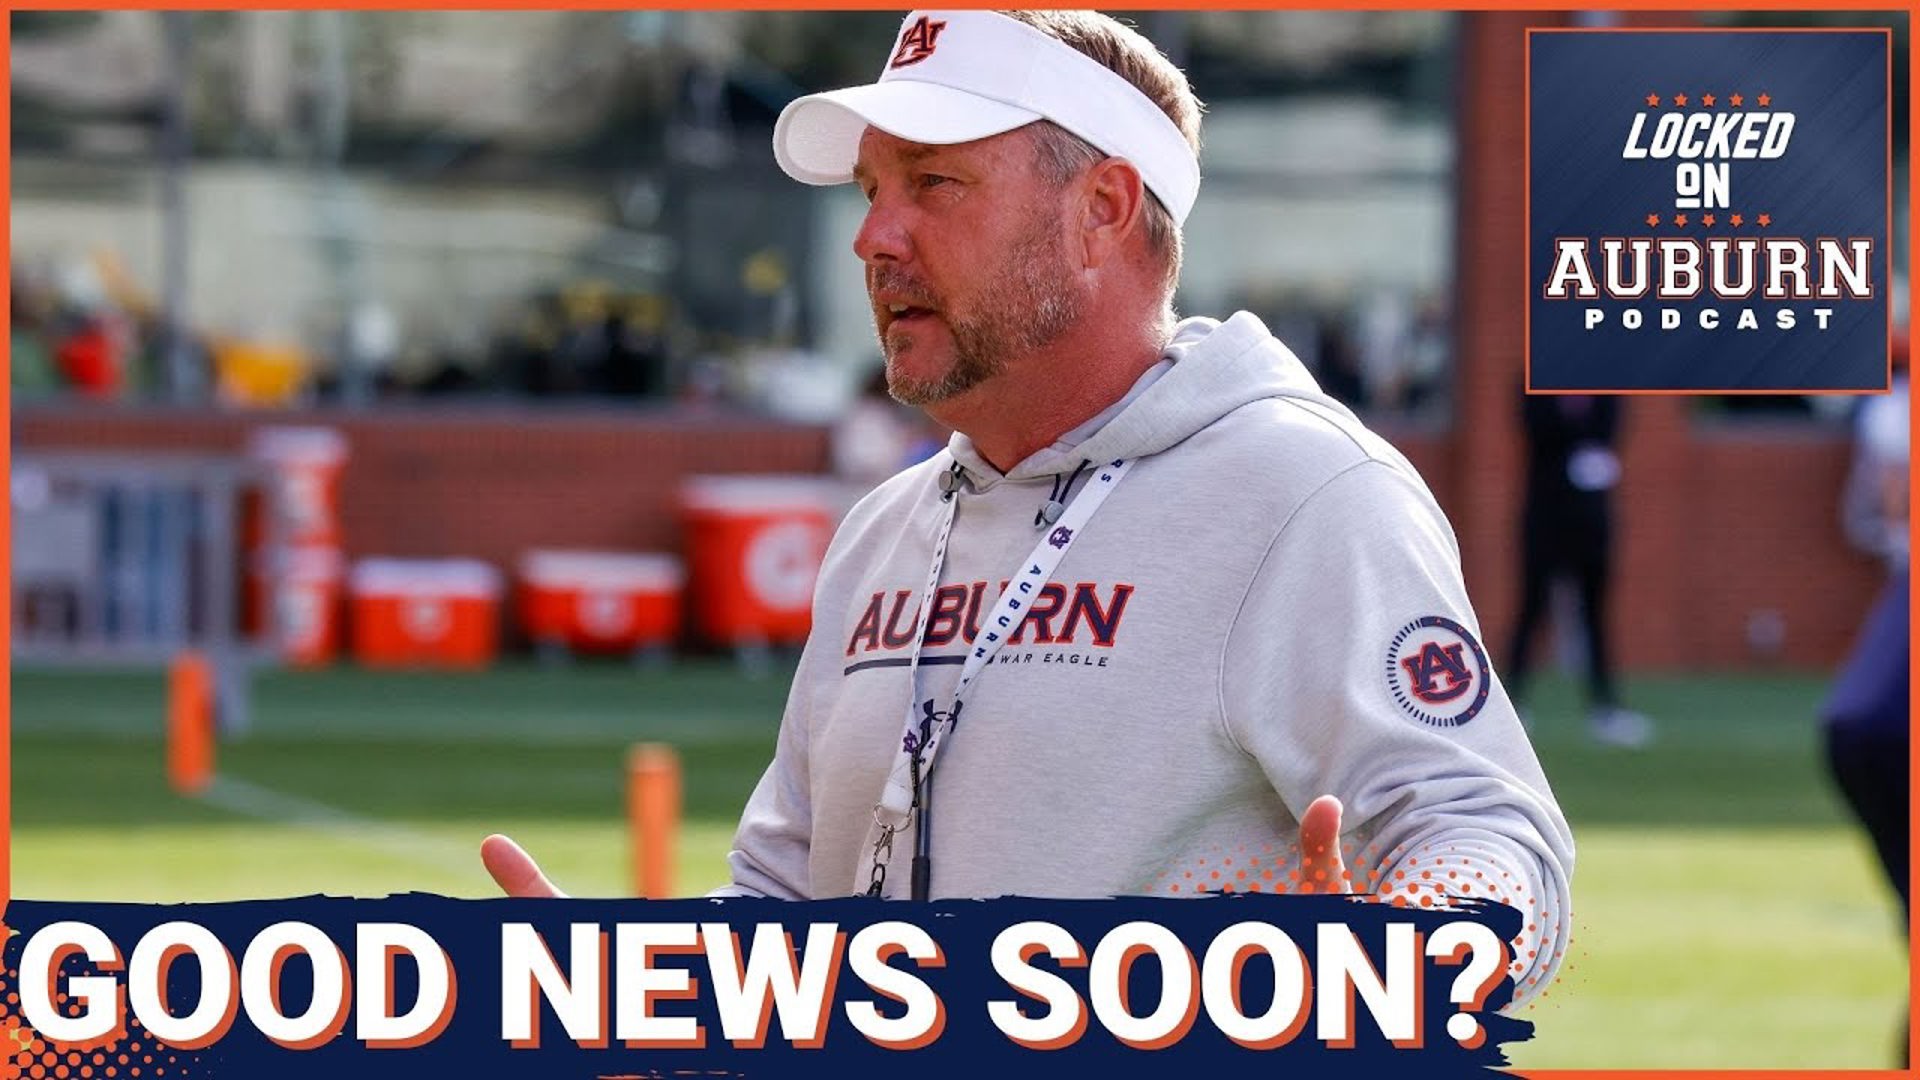 Is Auburn about to land another MAJOR recruit? Auburn Tigers Podcast